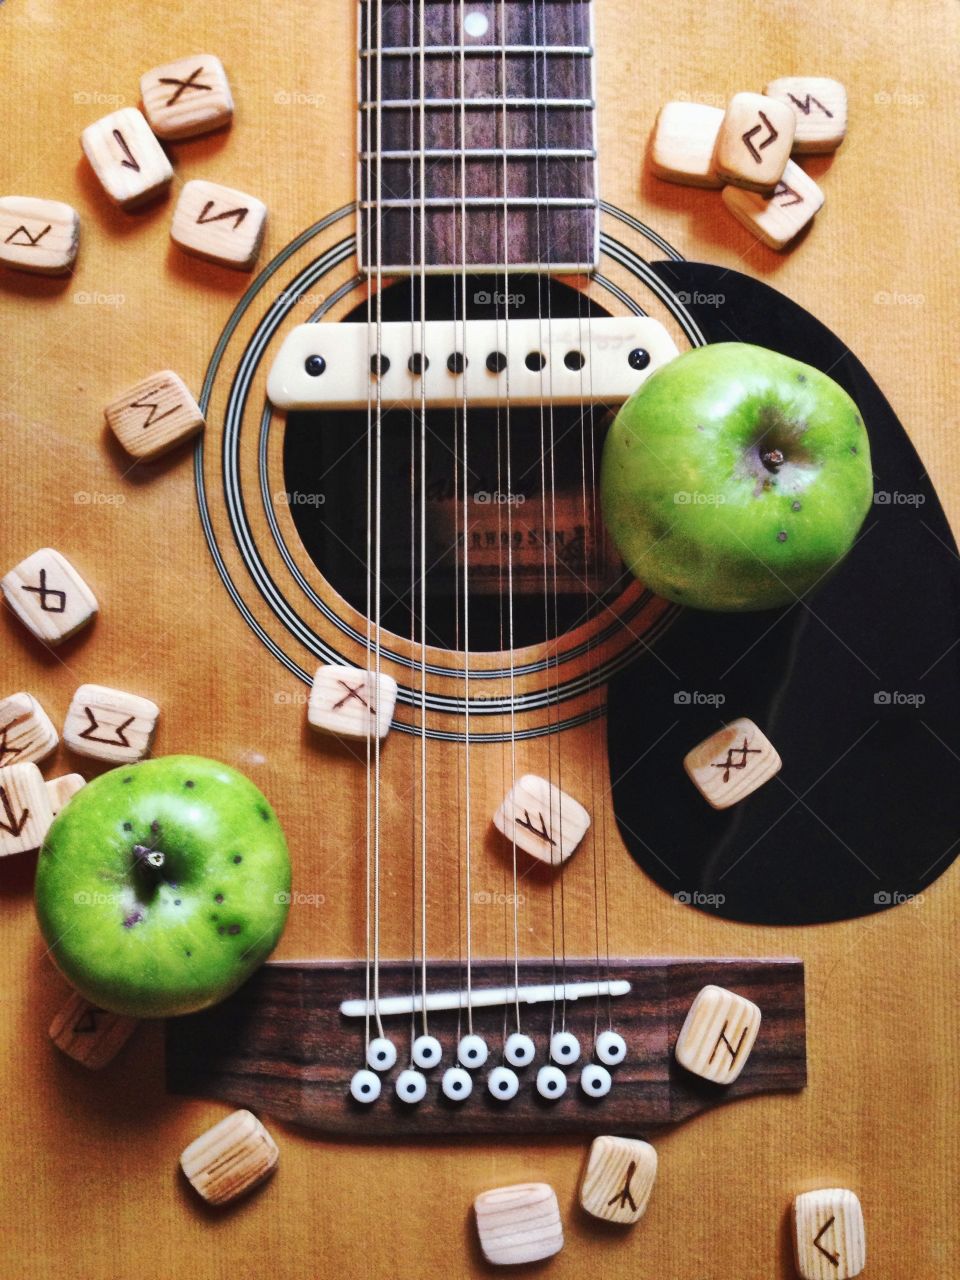 Apples and runes . On the guitar 